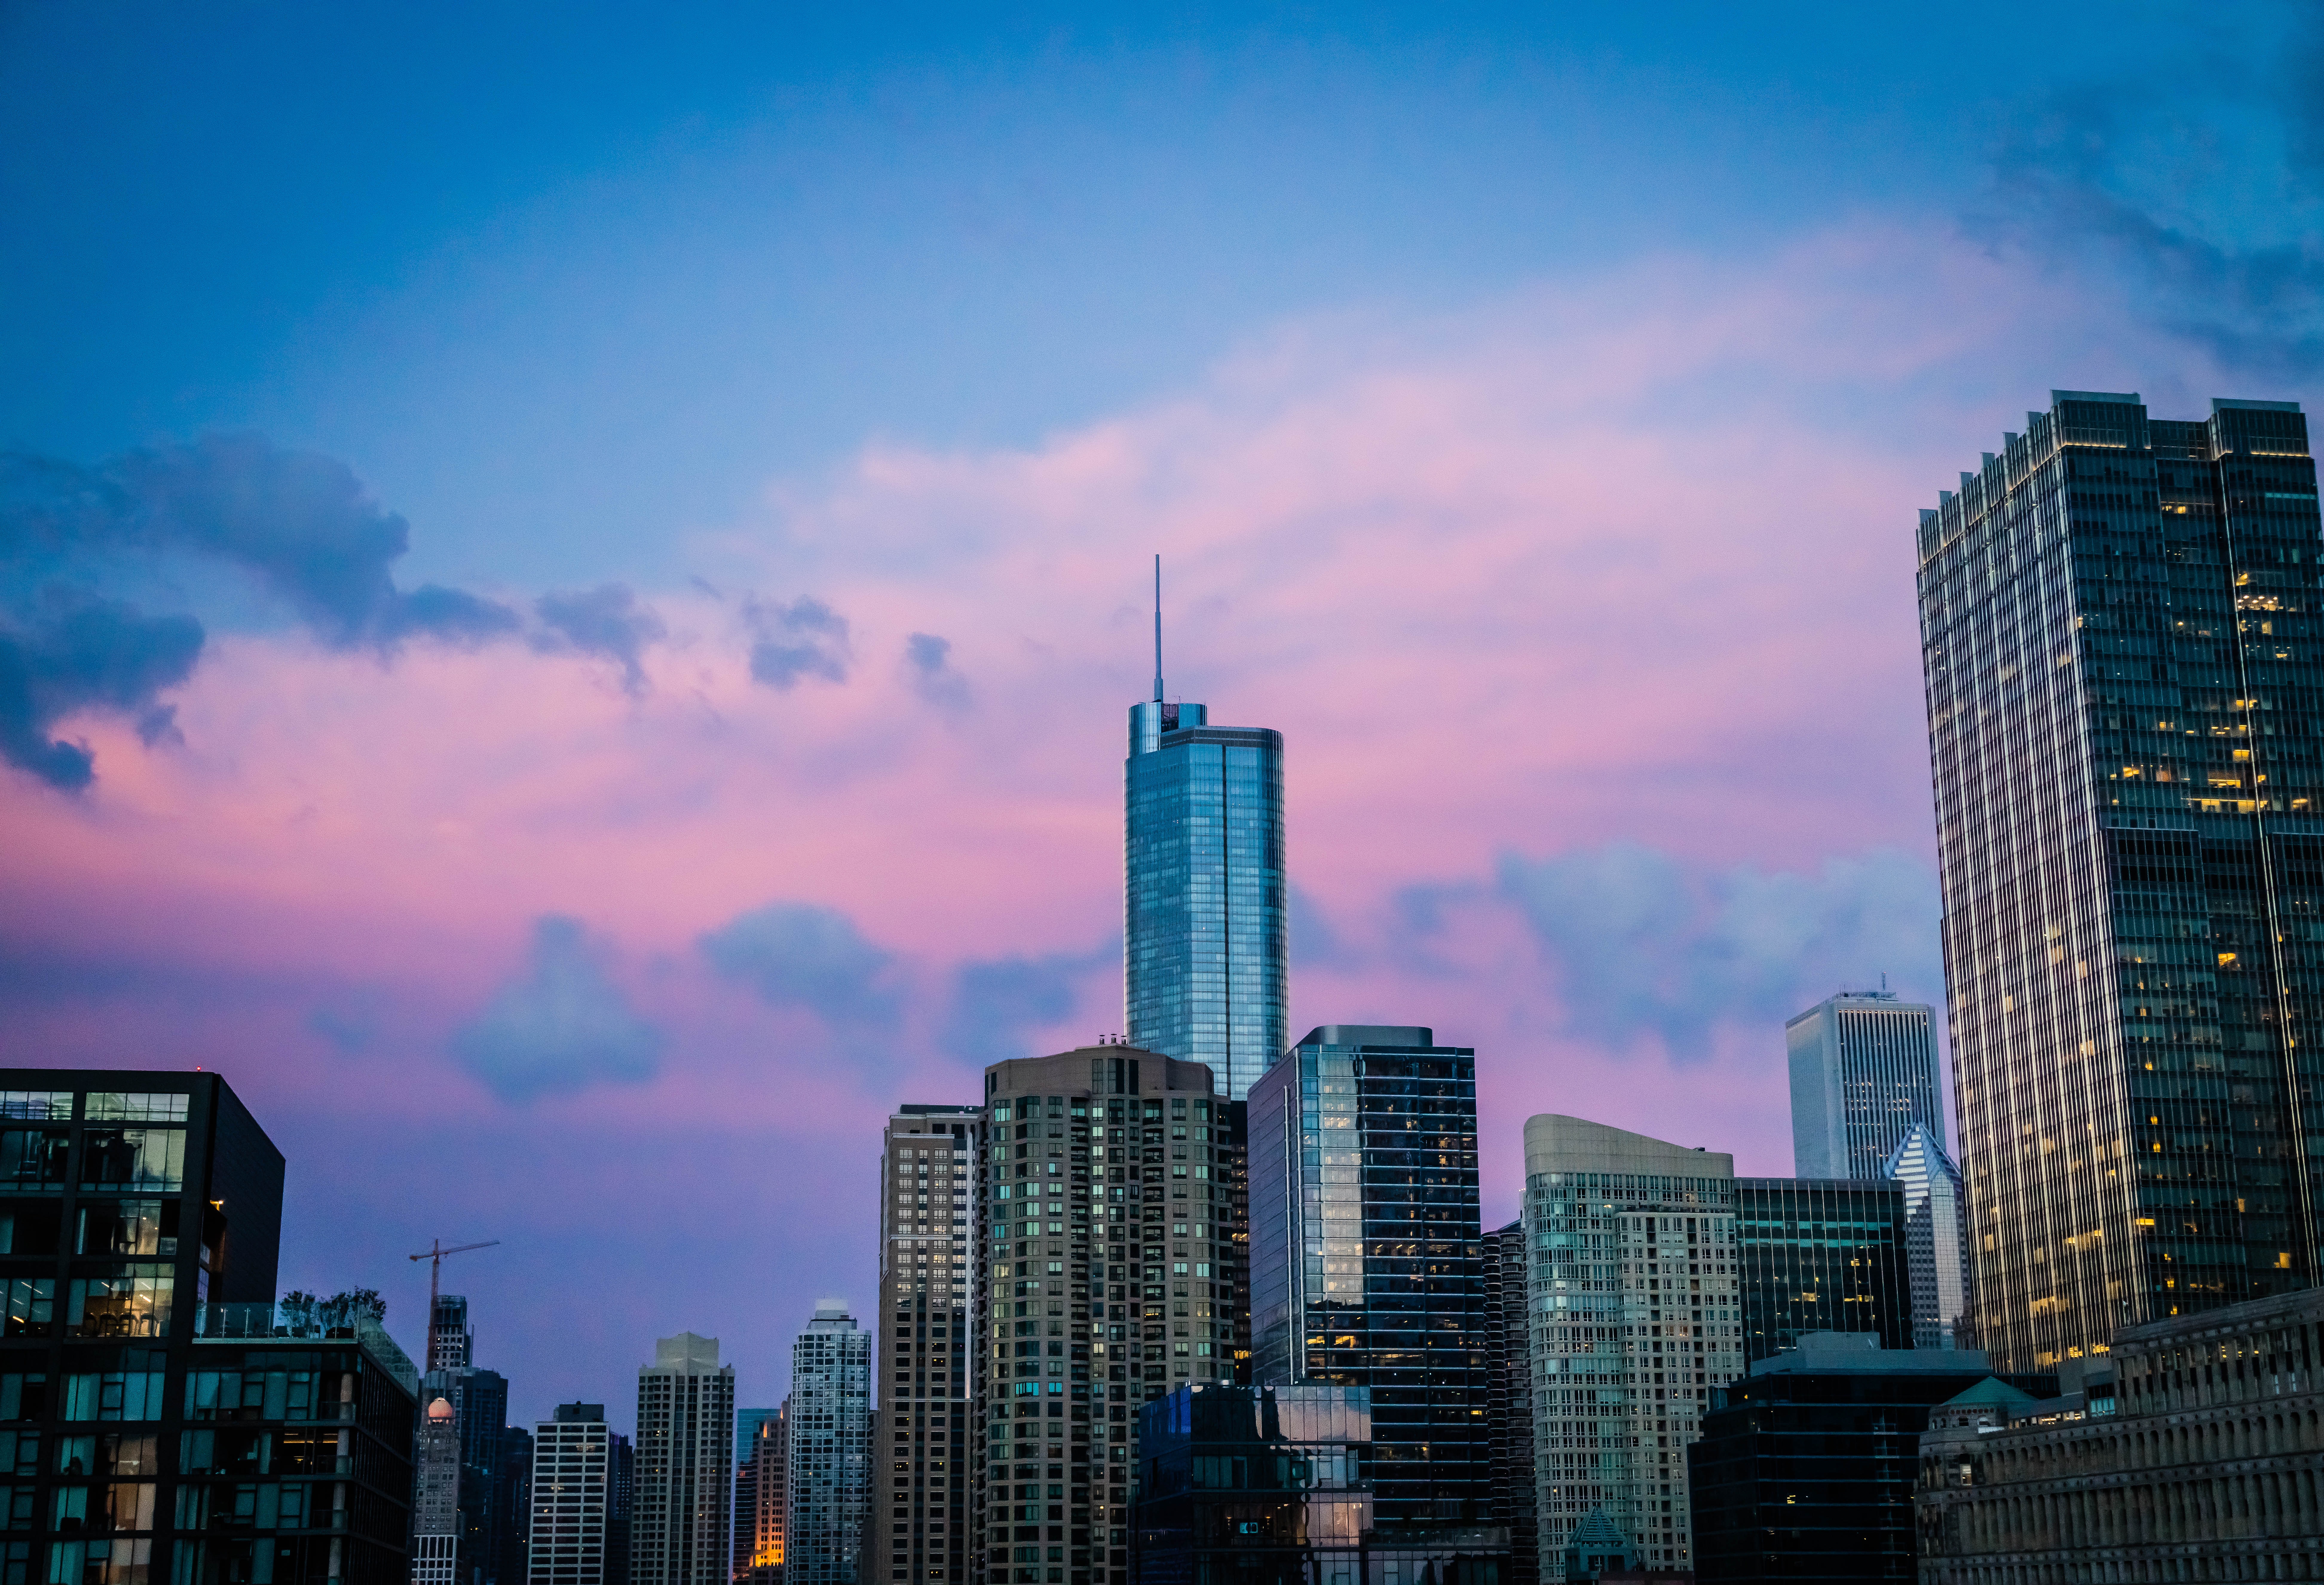 united states, cities, sunset, architecture, usa, city, skyscraper, chicago 32K